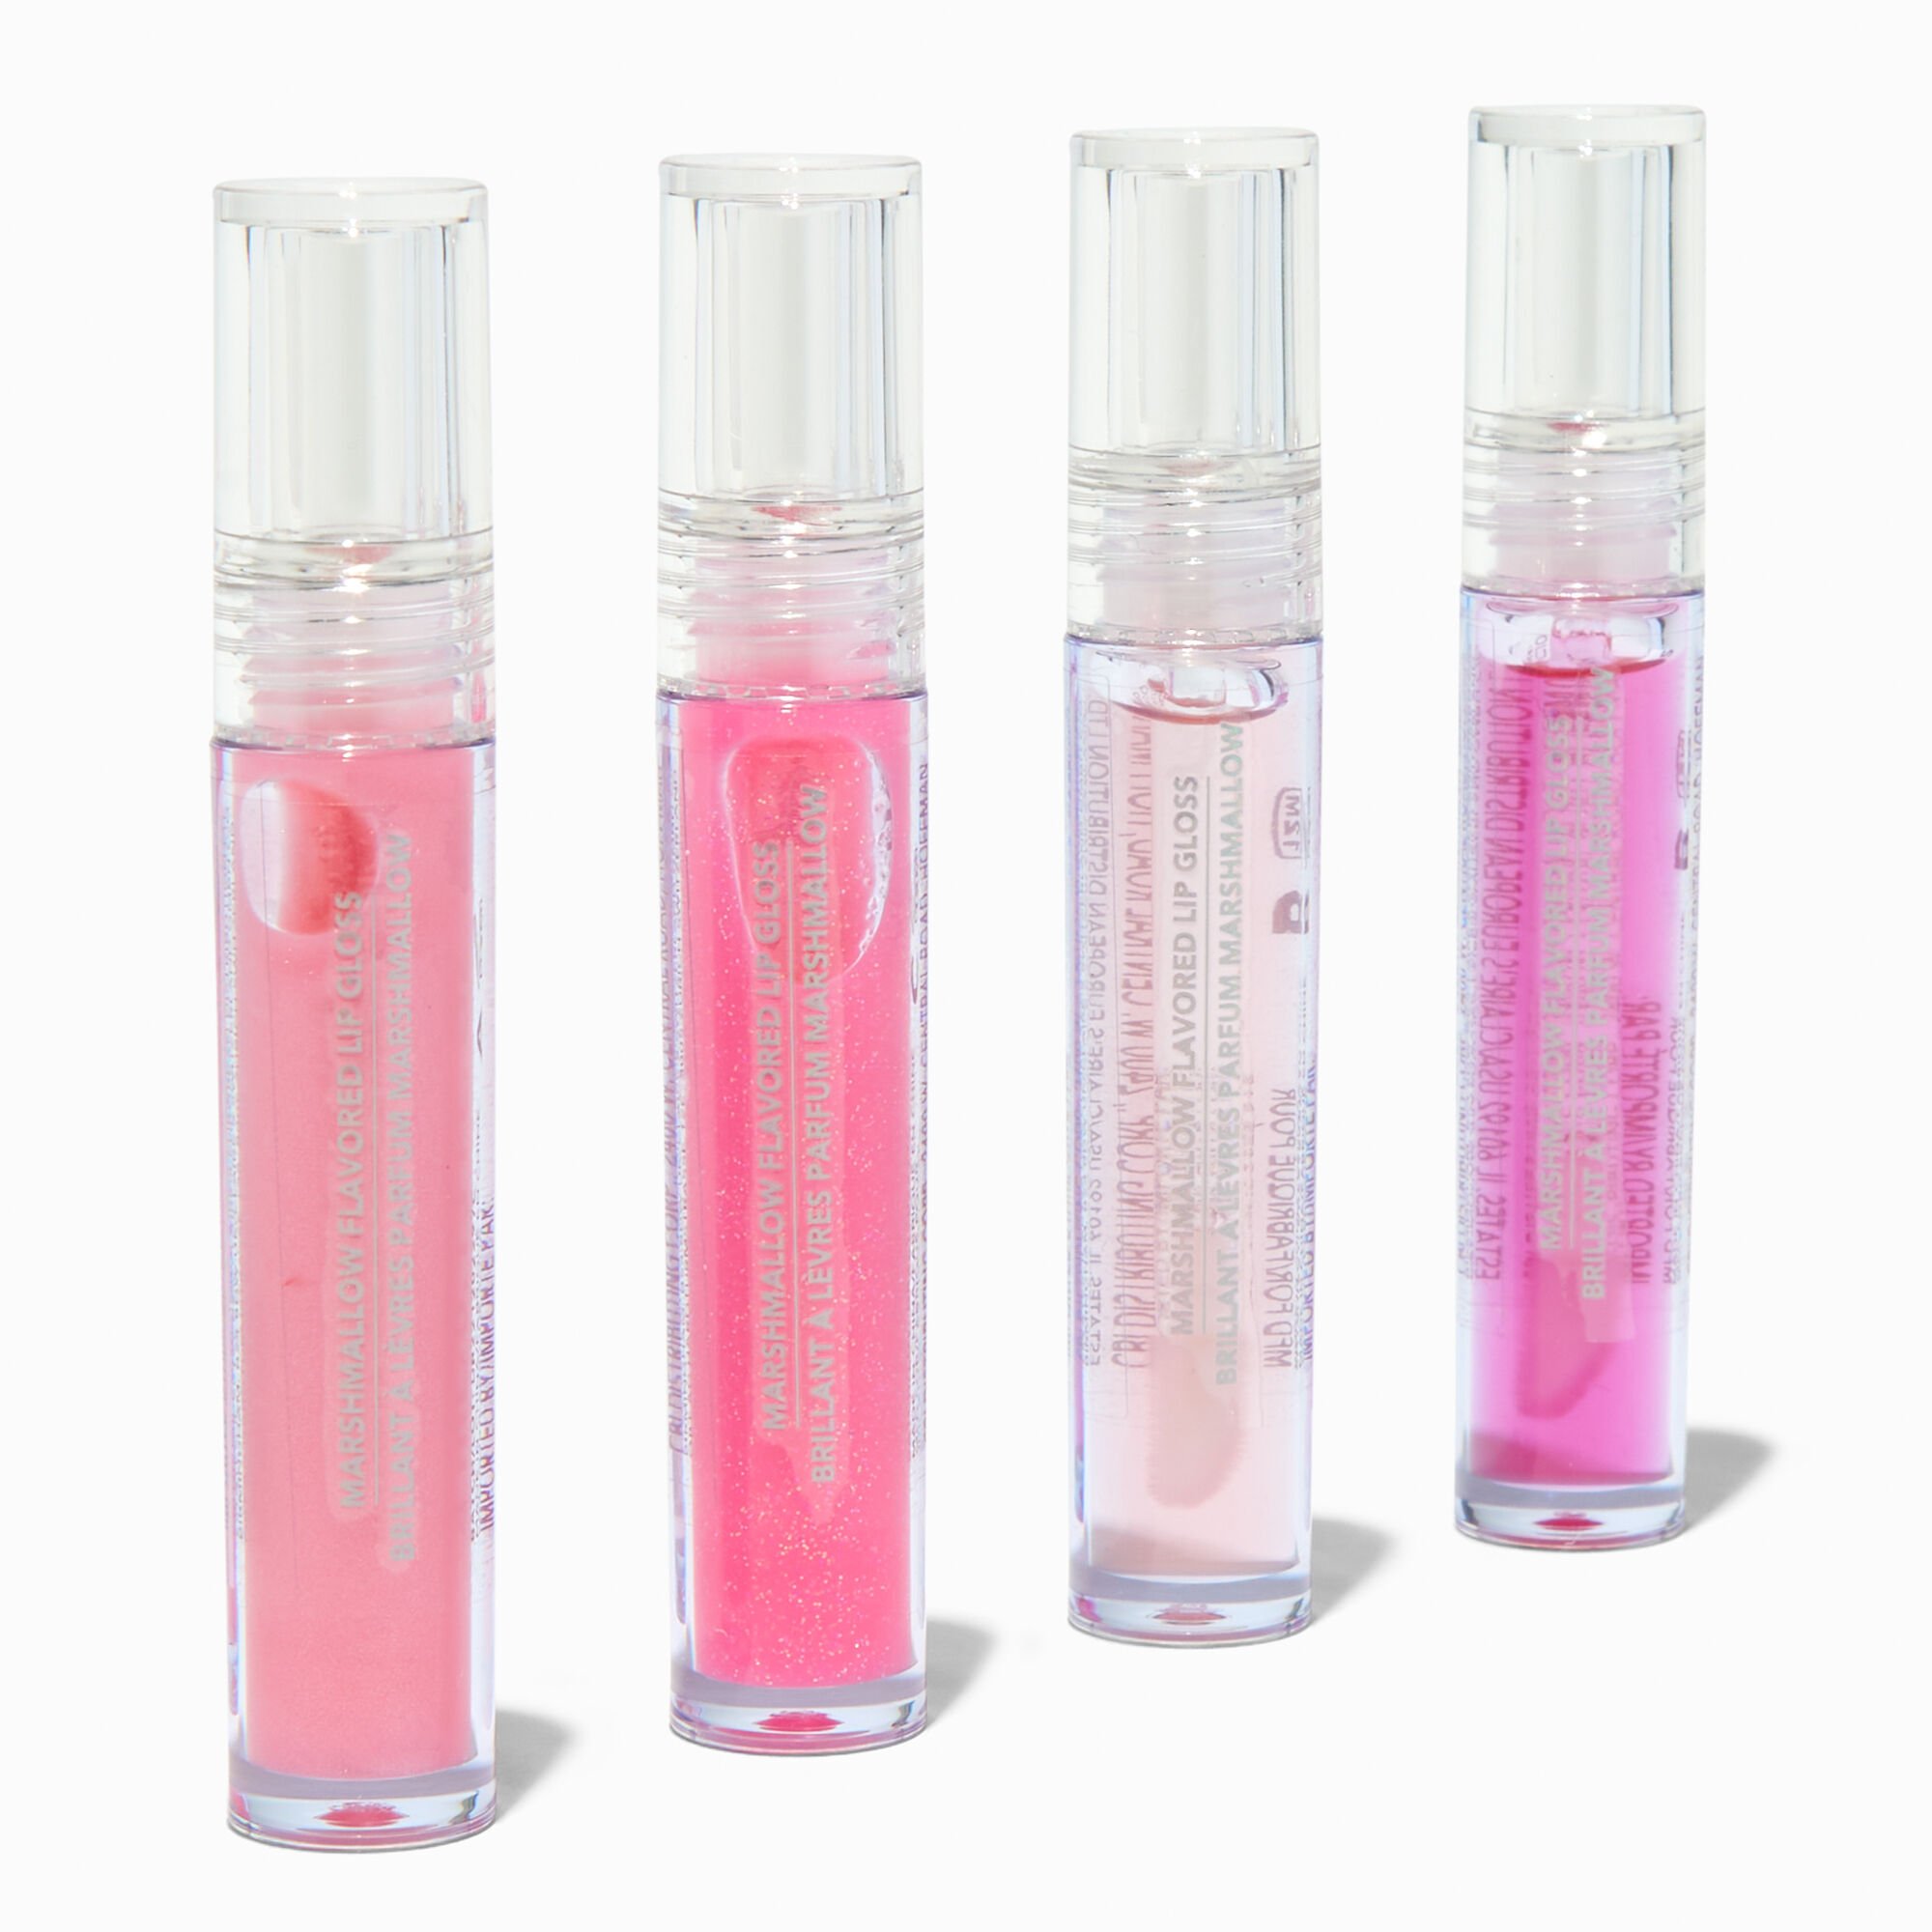 View Claires Prom Lip Gloss 4 Pack Pink information